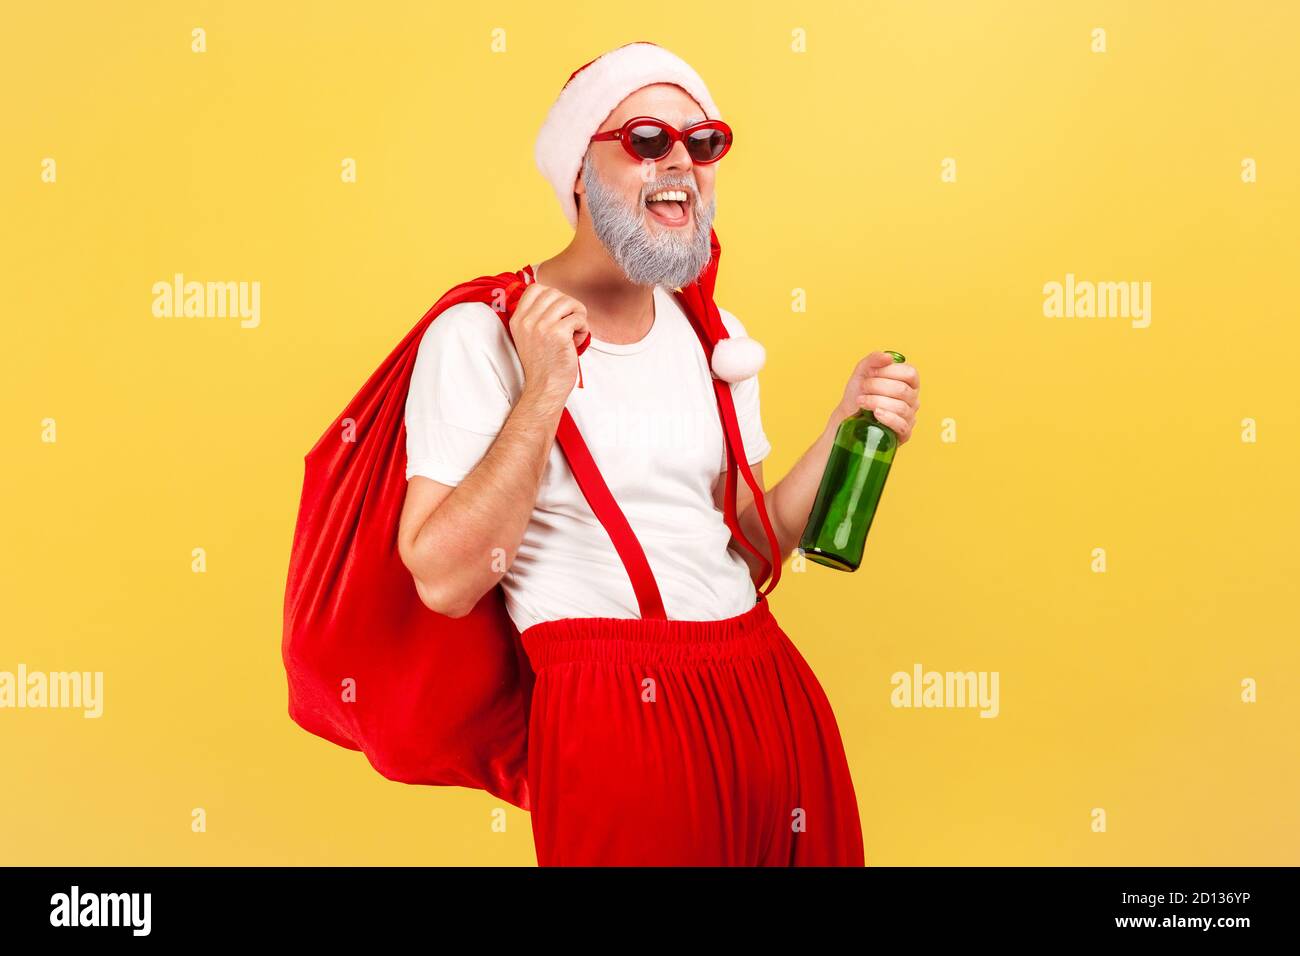 Happy elderly man in santa claus hat, trendy sunglasses and pants with suspenders holding bottle with alcohol and big red bag, celebration, bad habit. Stock Photo